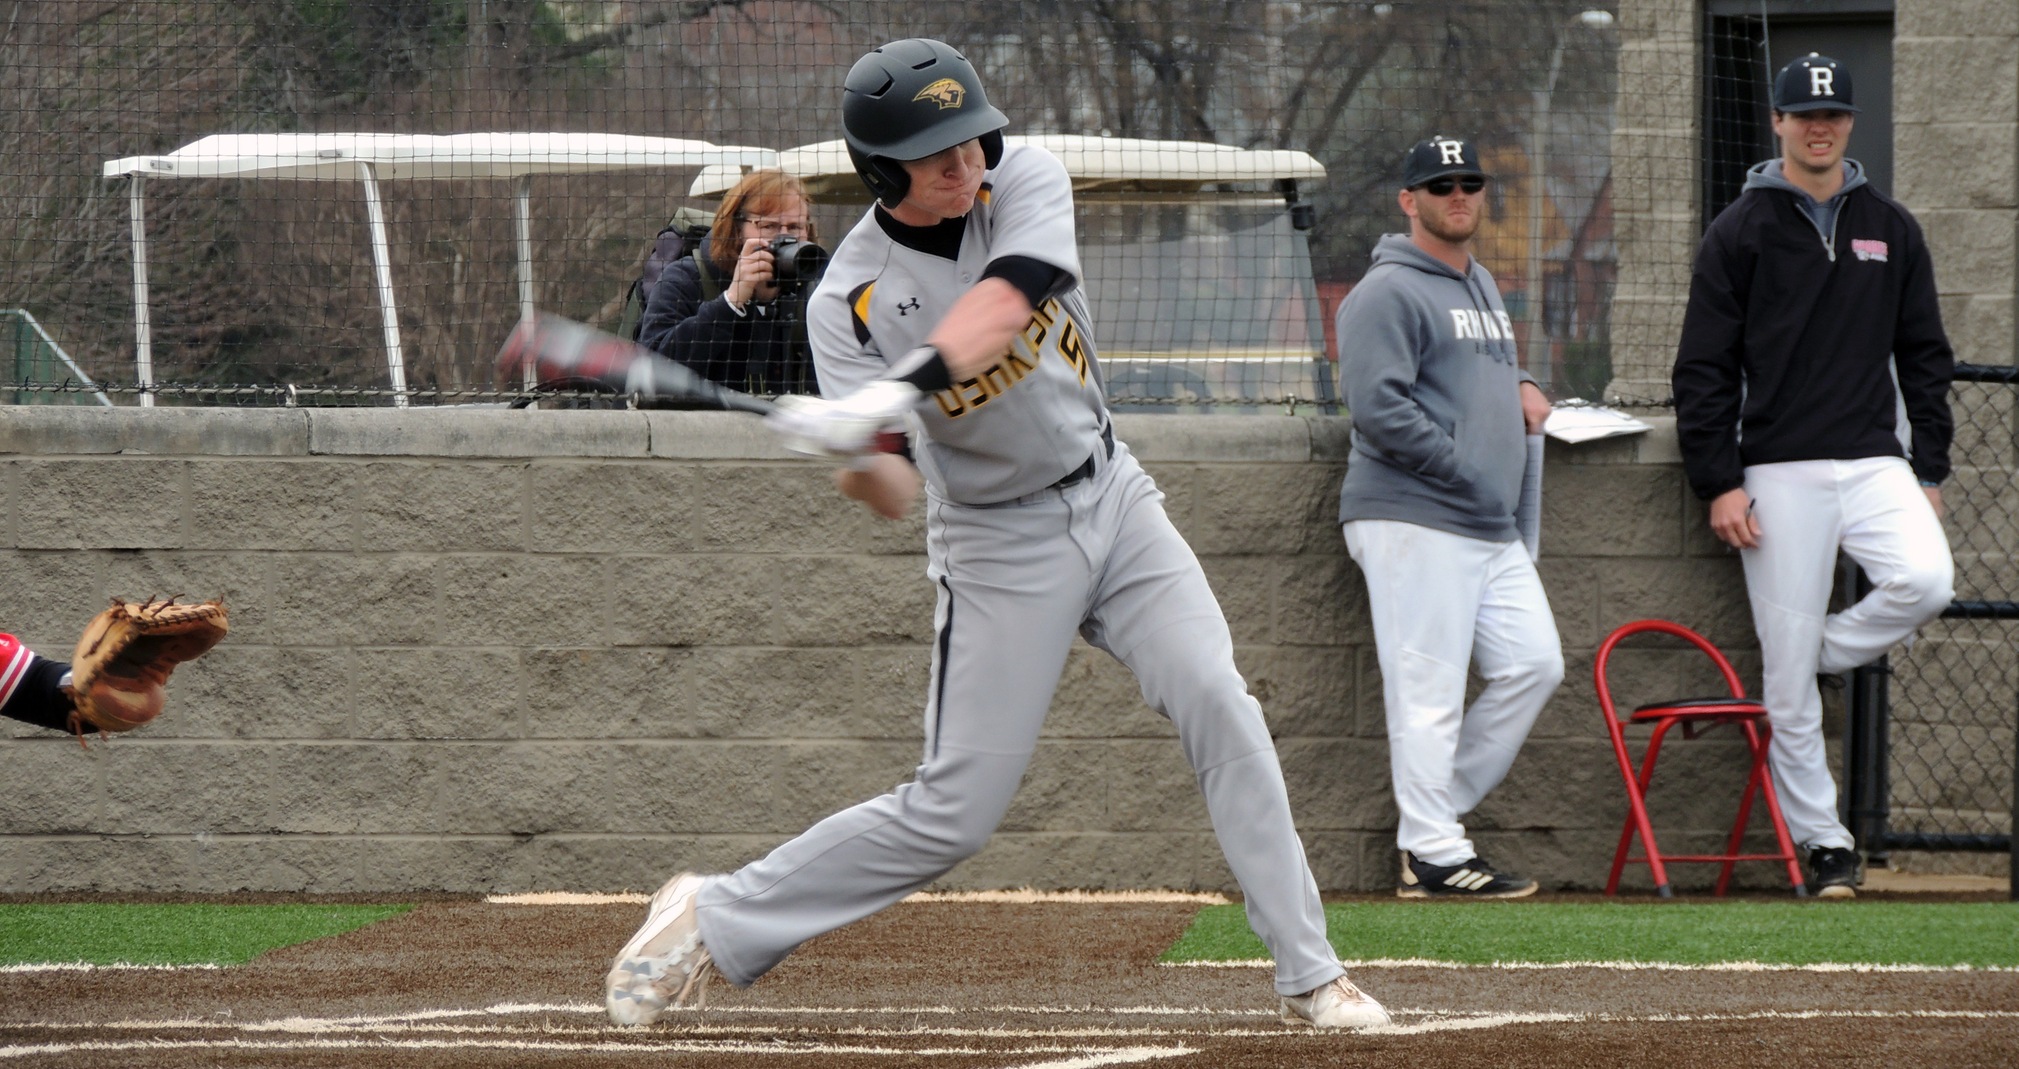 Hunter Staniske had two hits against the Lynx, including a third-inning run-scoring single.